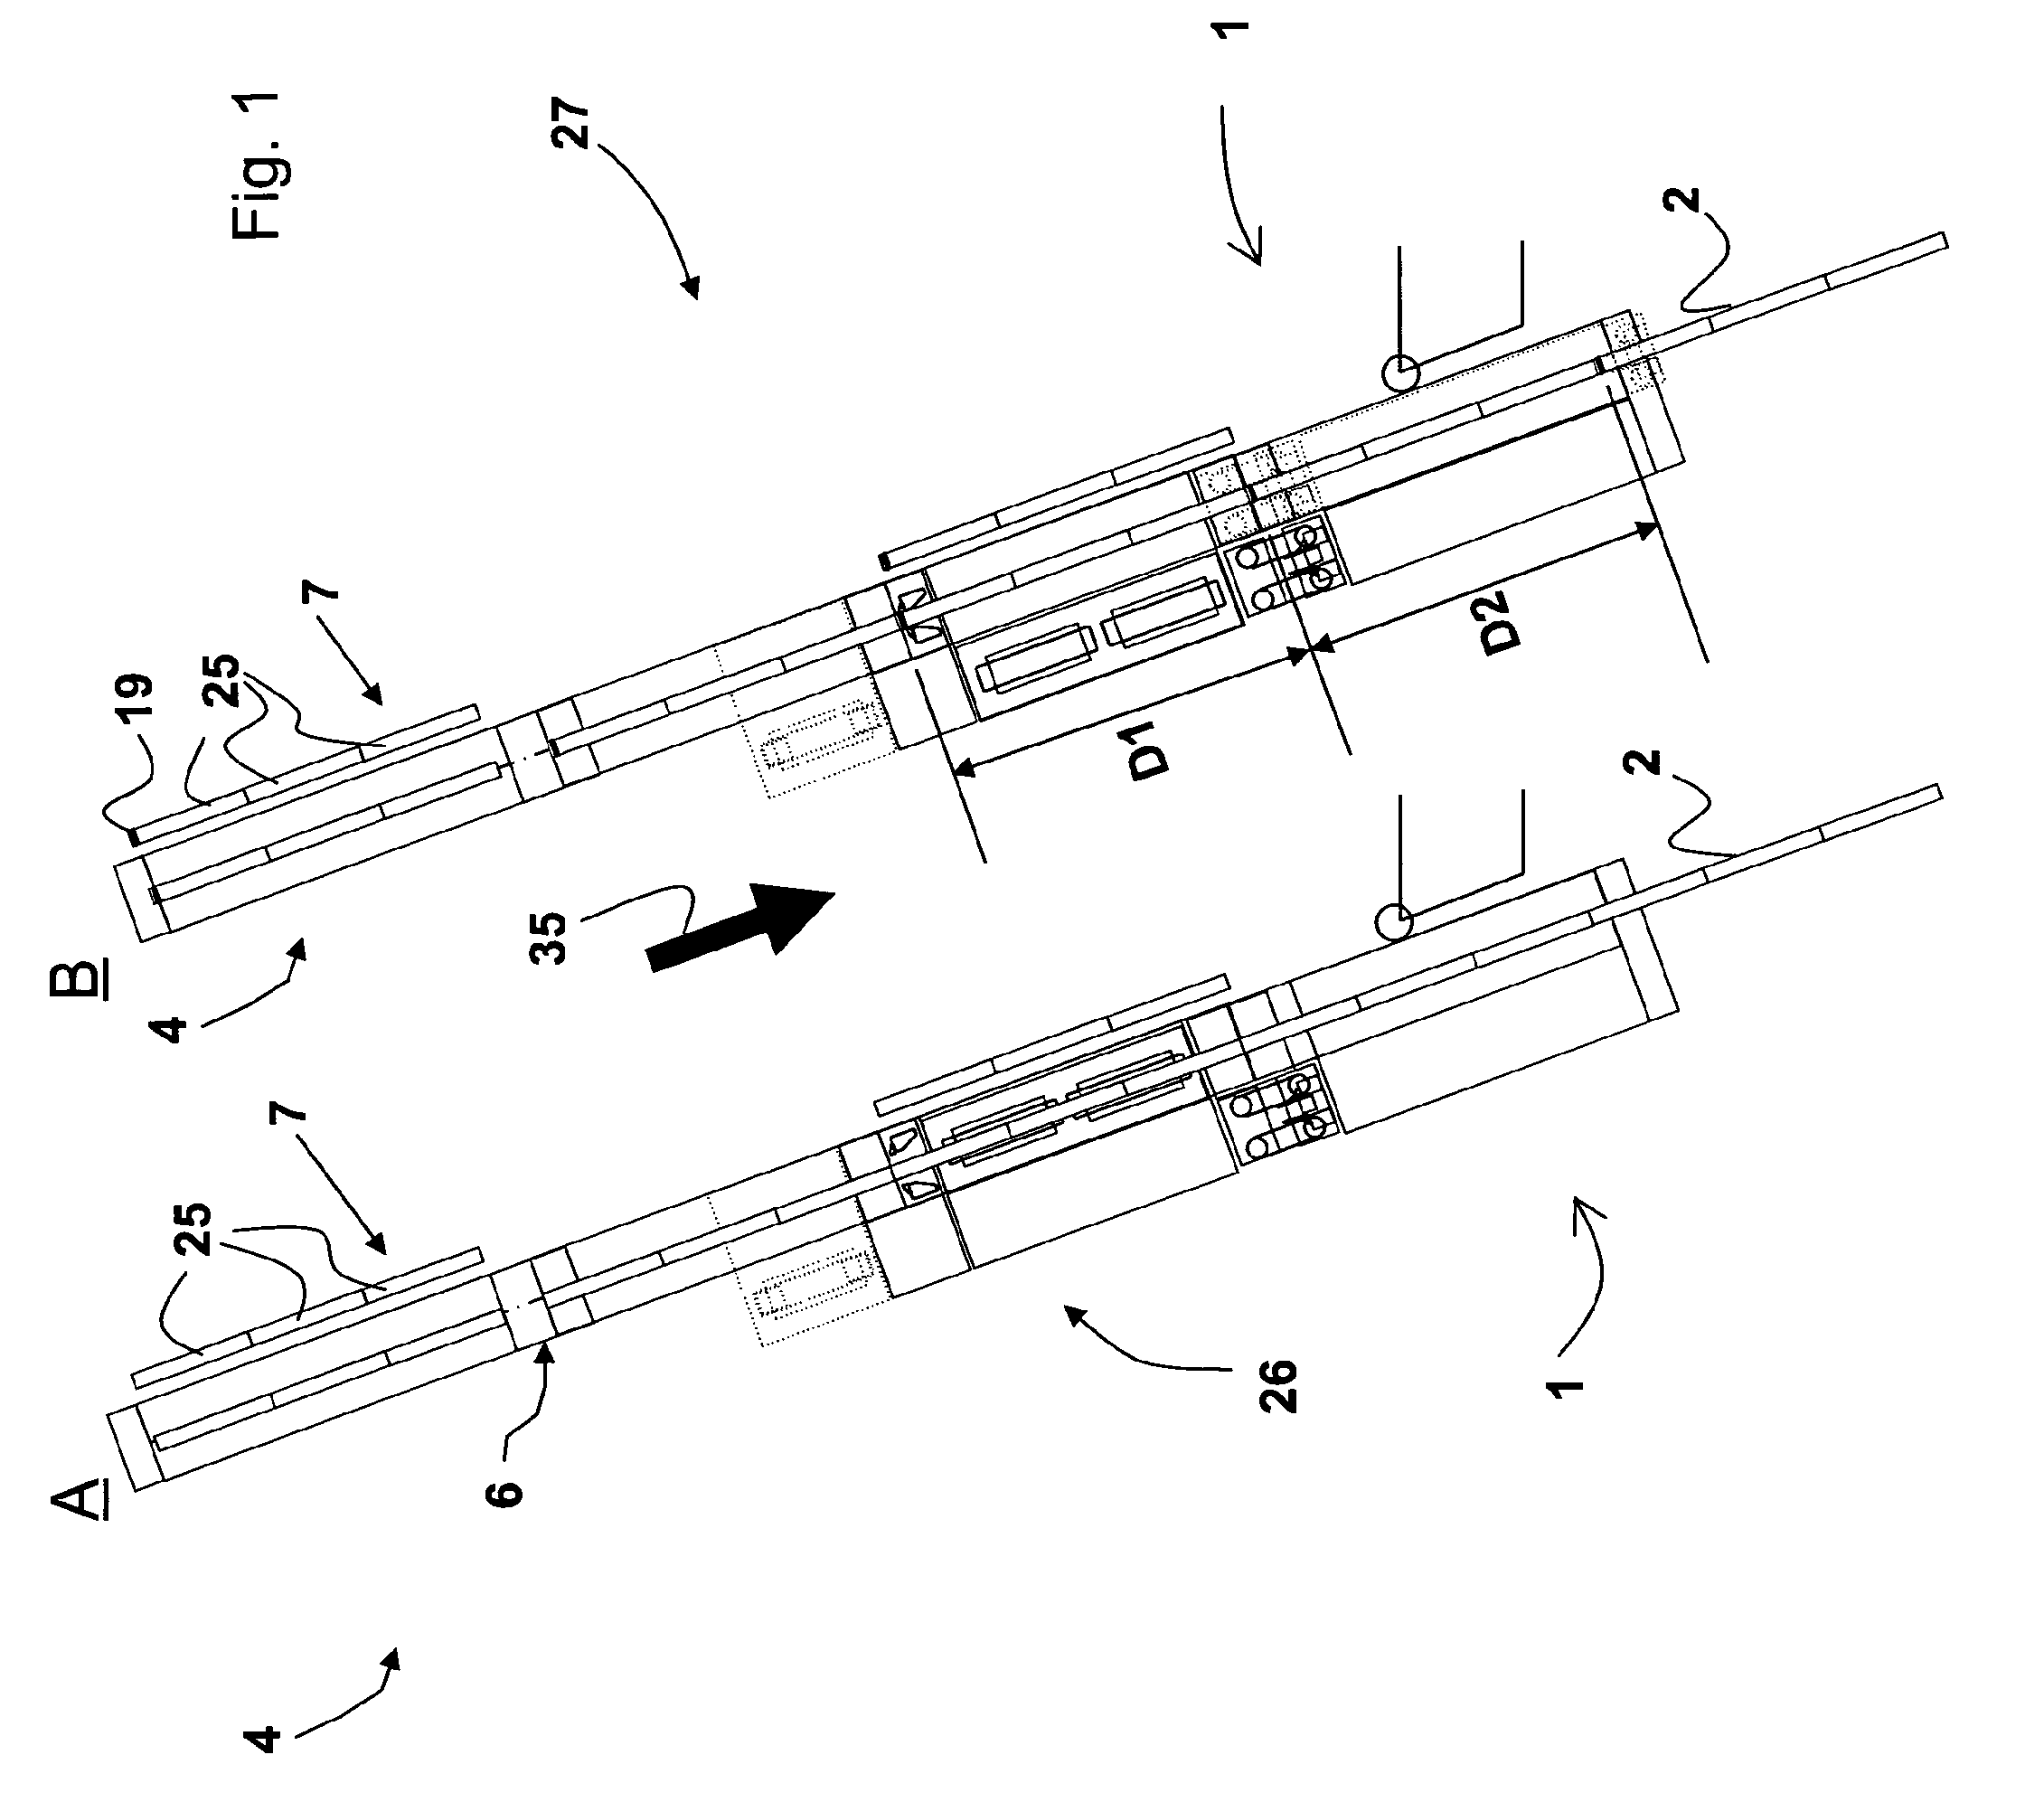 Pipeline laying vessel and method of laying a pipeline